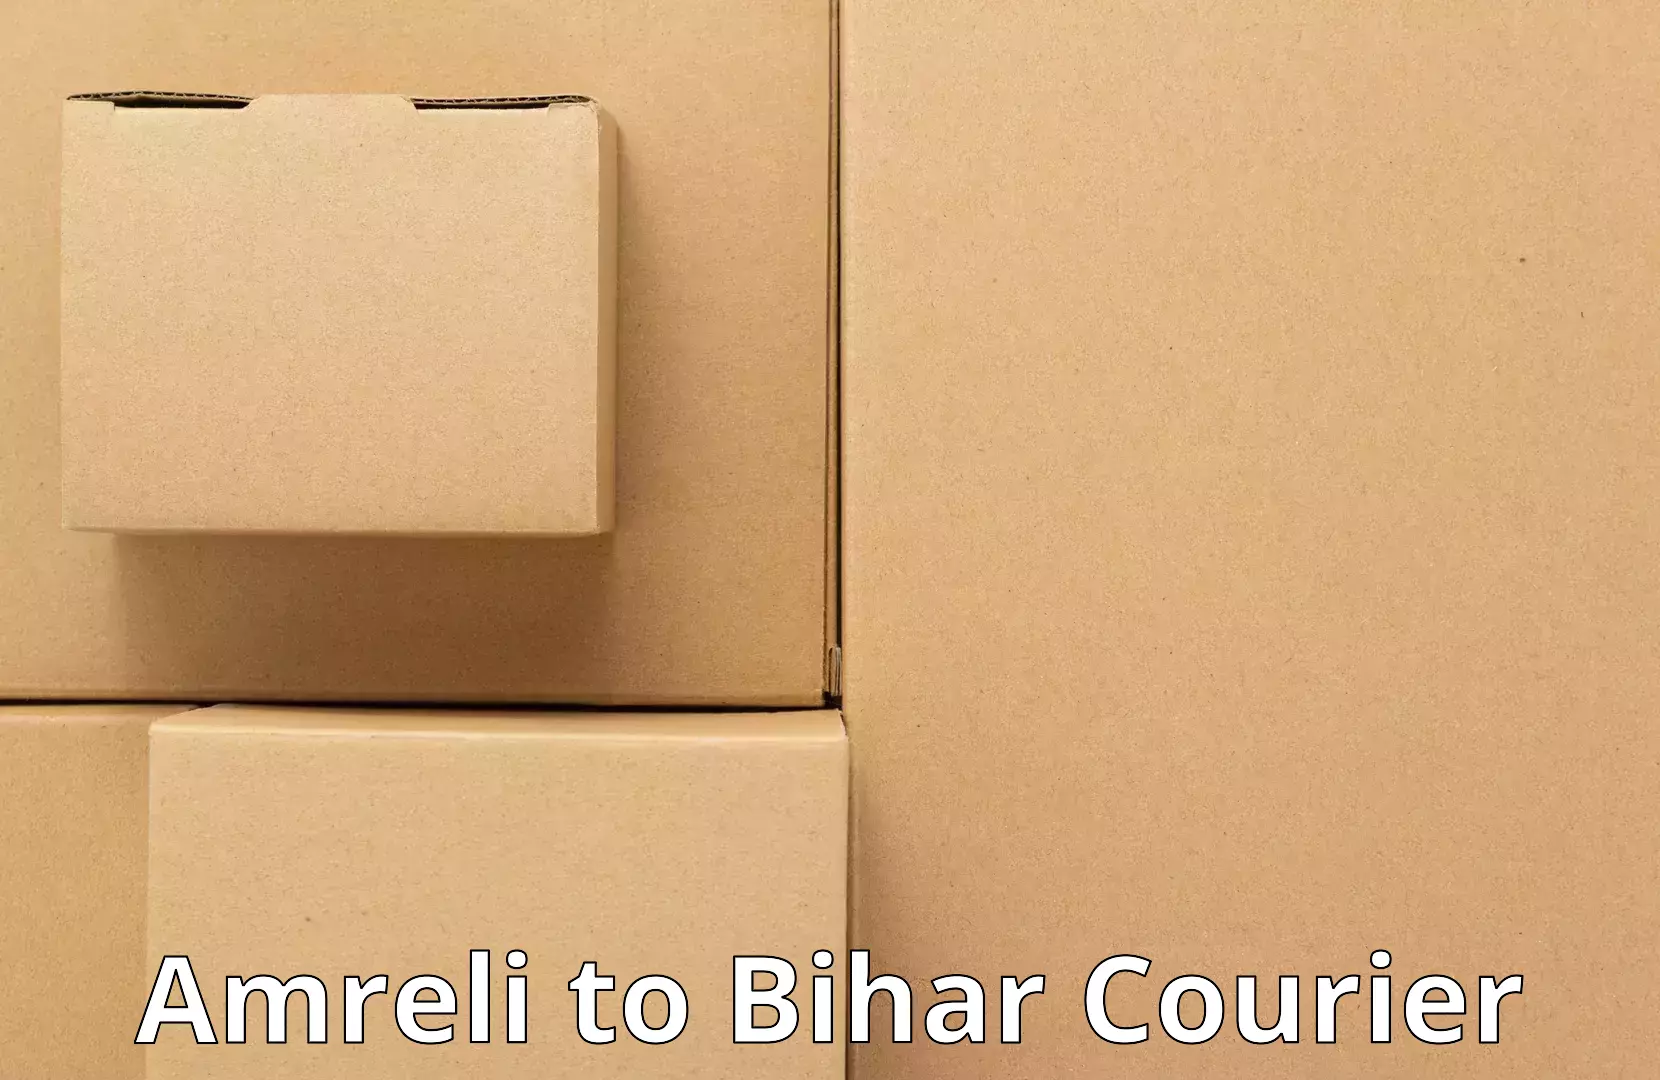 Furniture delivery service Amreli to Bhojpur